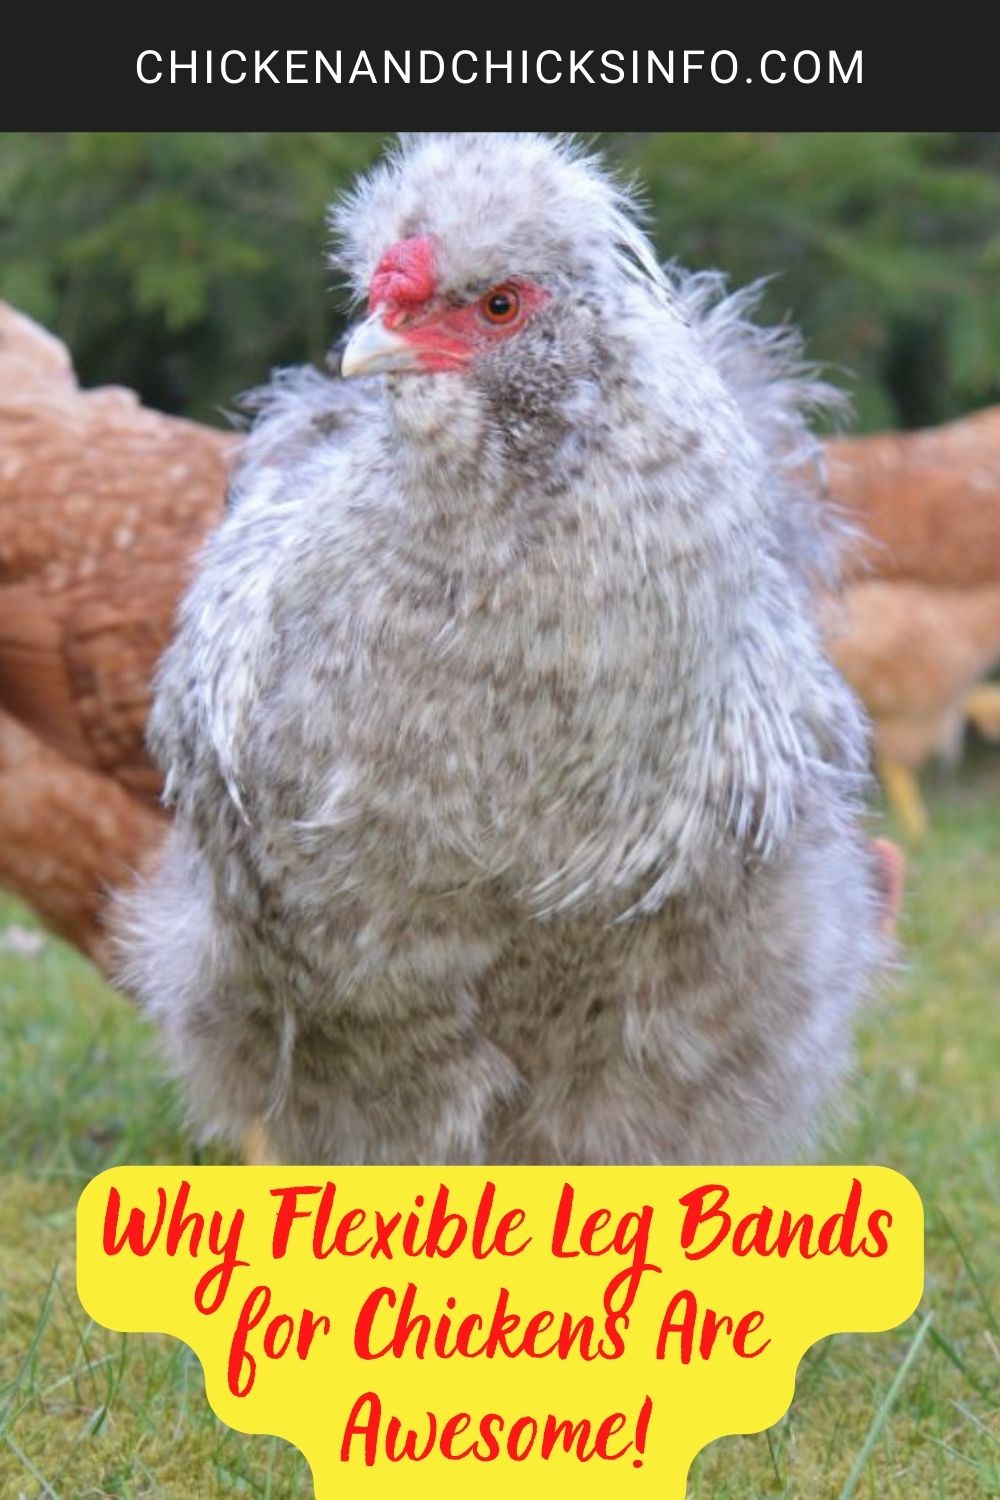 Why Flexible Leg Bands for Chickens Are Awesome! poster.
